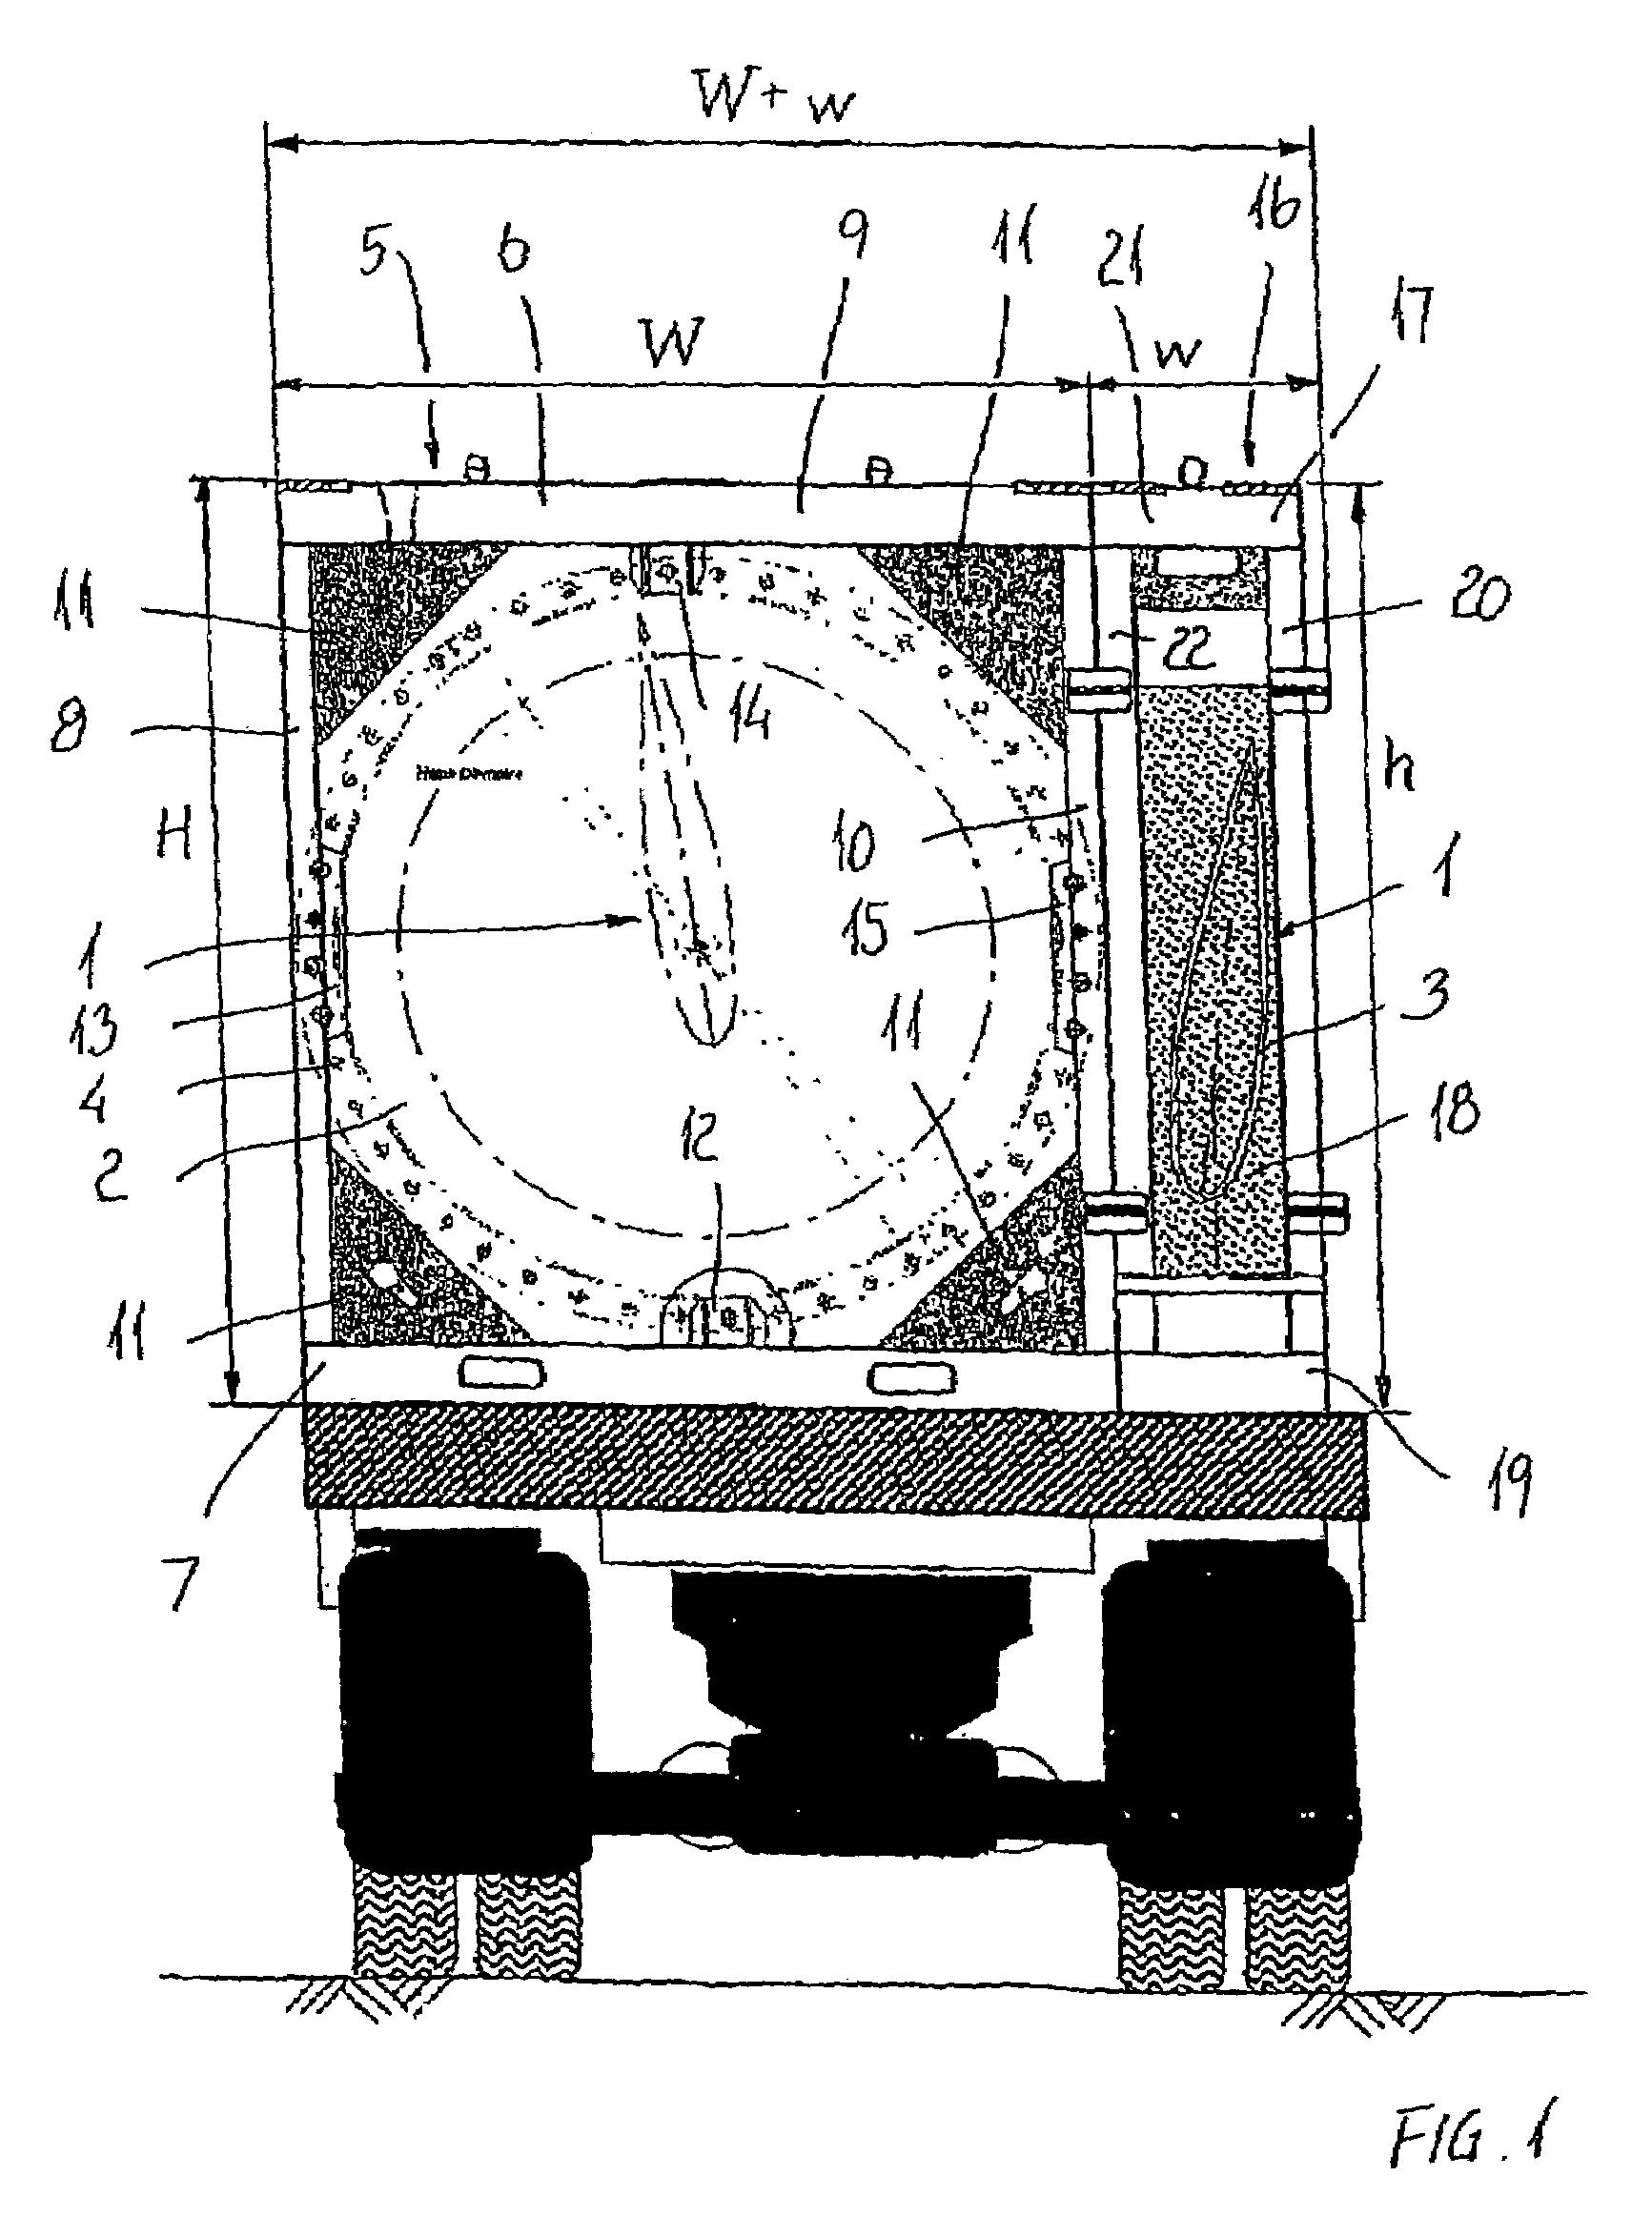 Method for transporting a set of large longitudinal items, a package system to be used by the method and use of such a package system